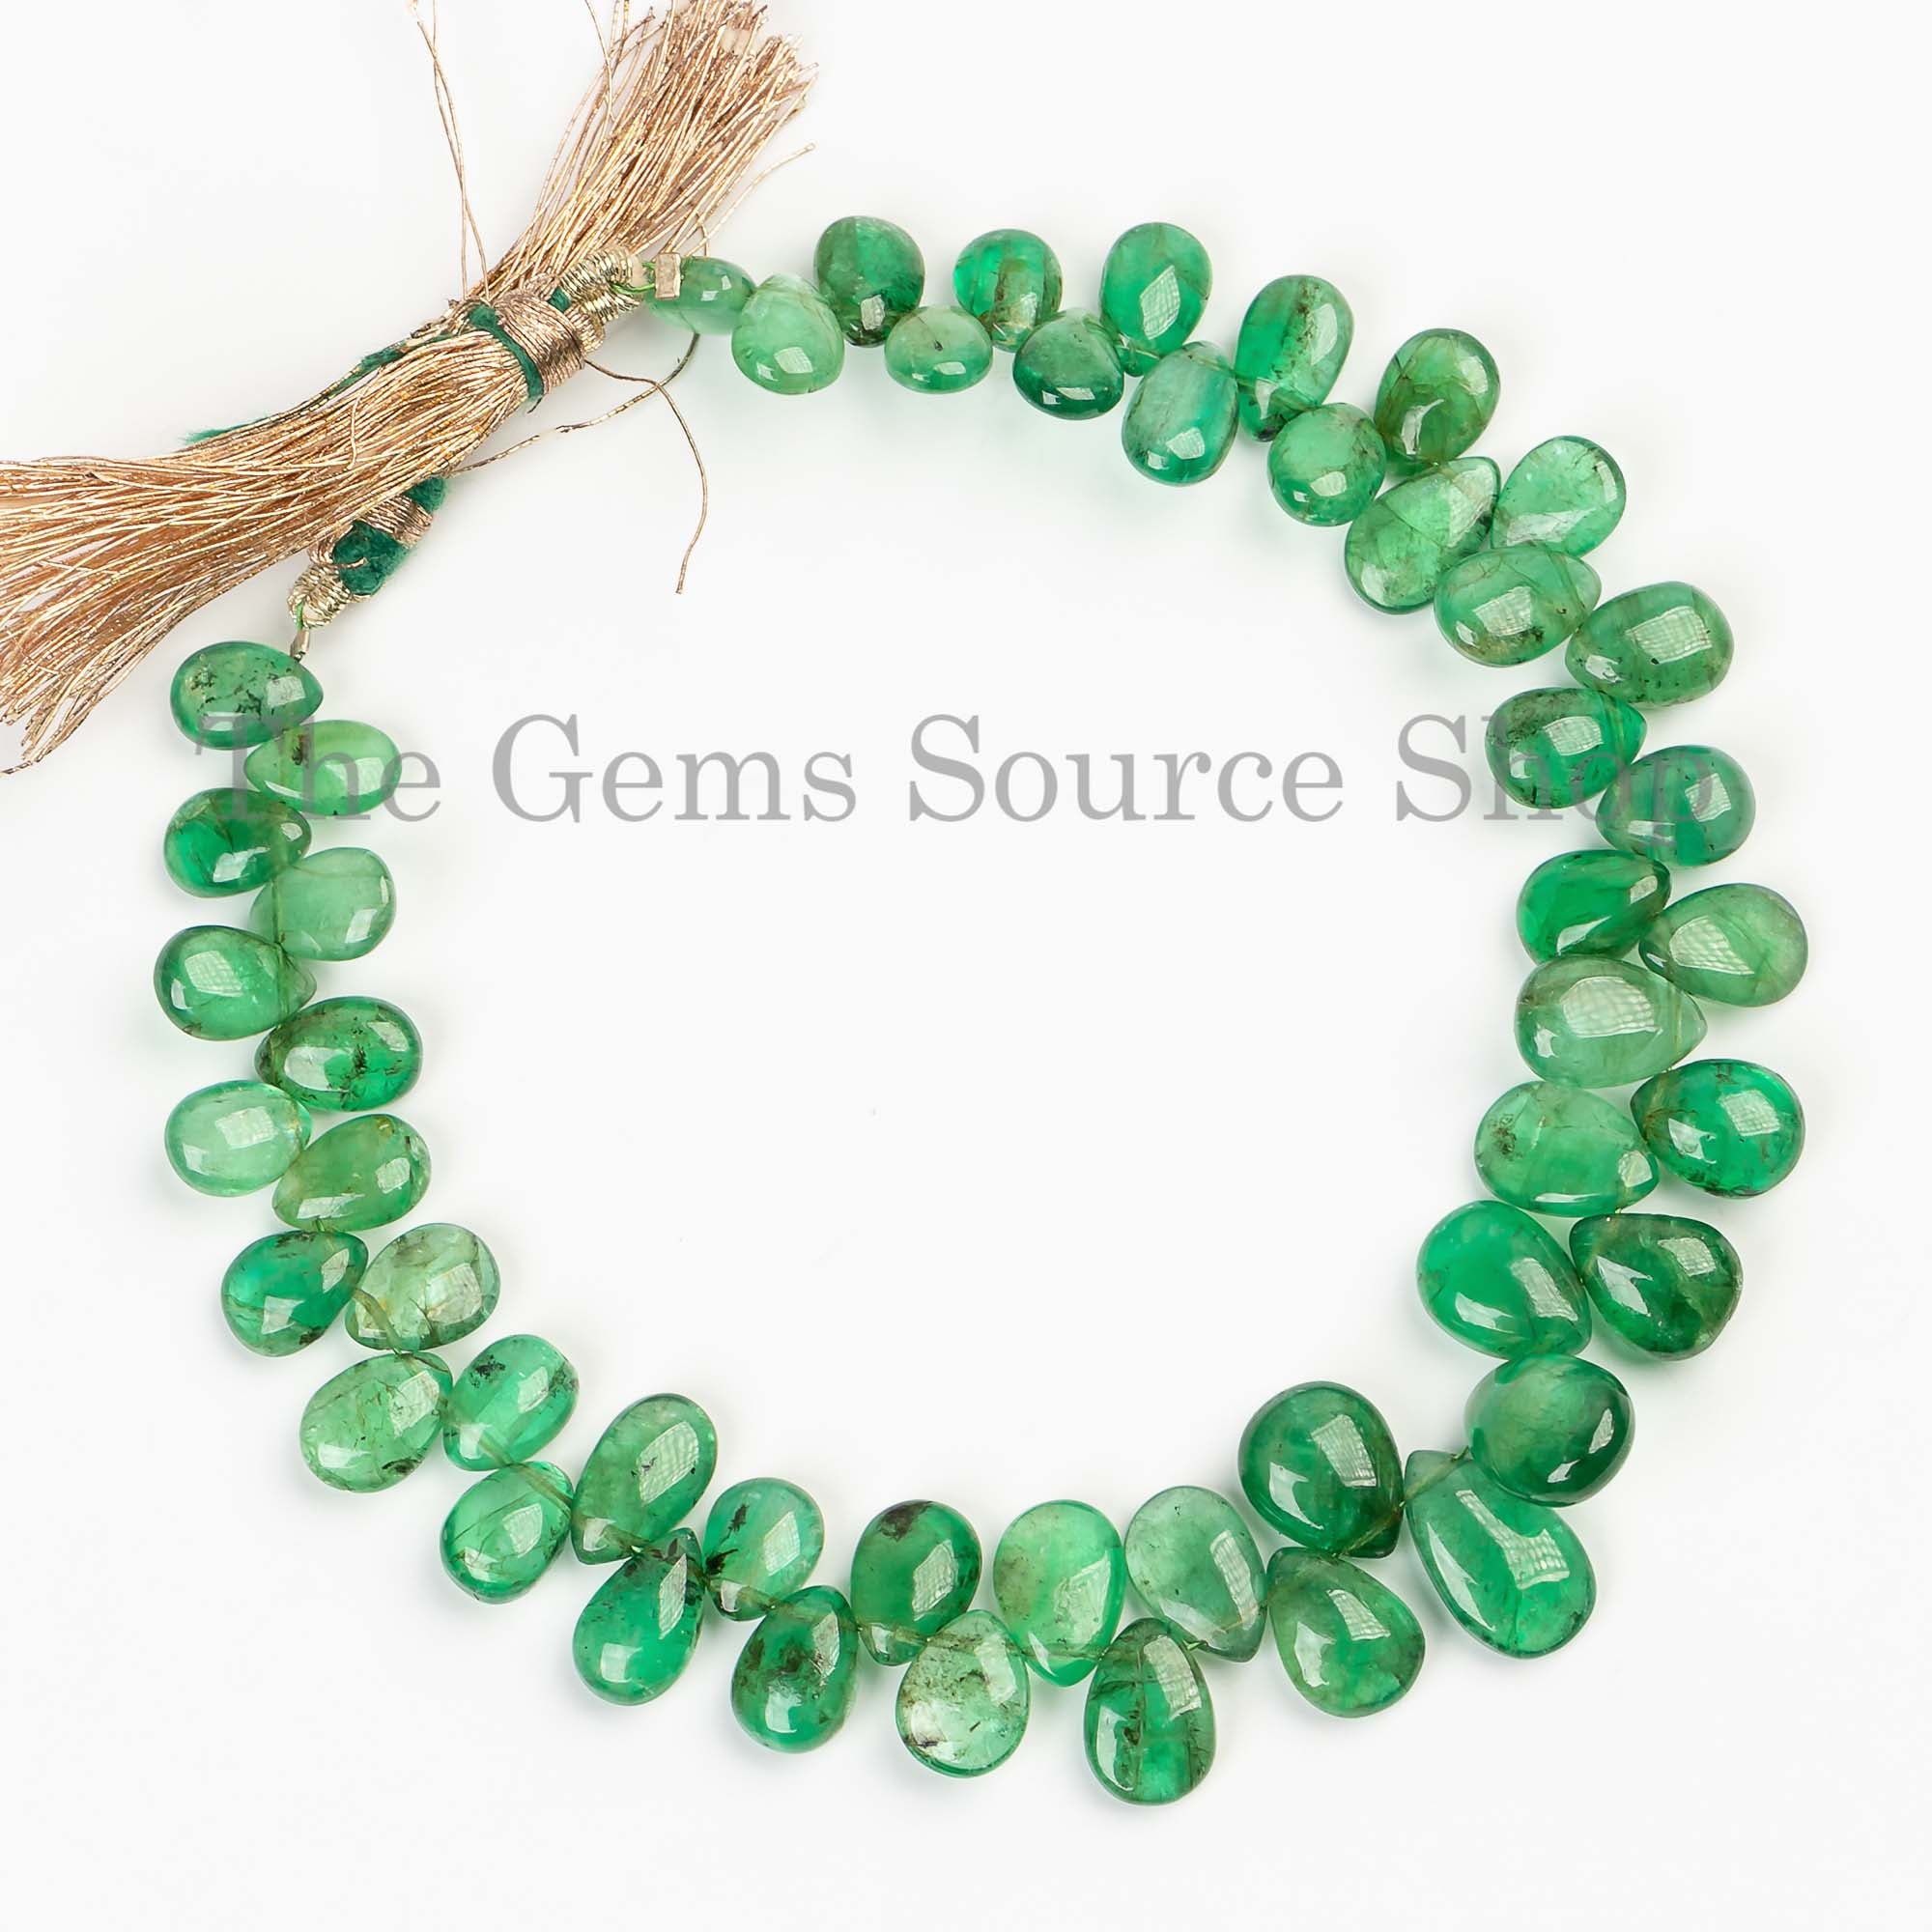 Top Quality Natural Emerald Smooth Pear Beads, Plain Emerald Beads, Side Drill Pear Beads